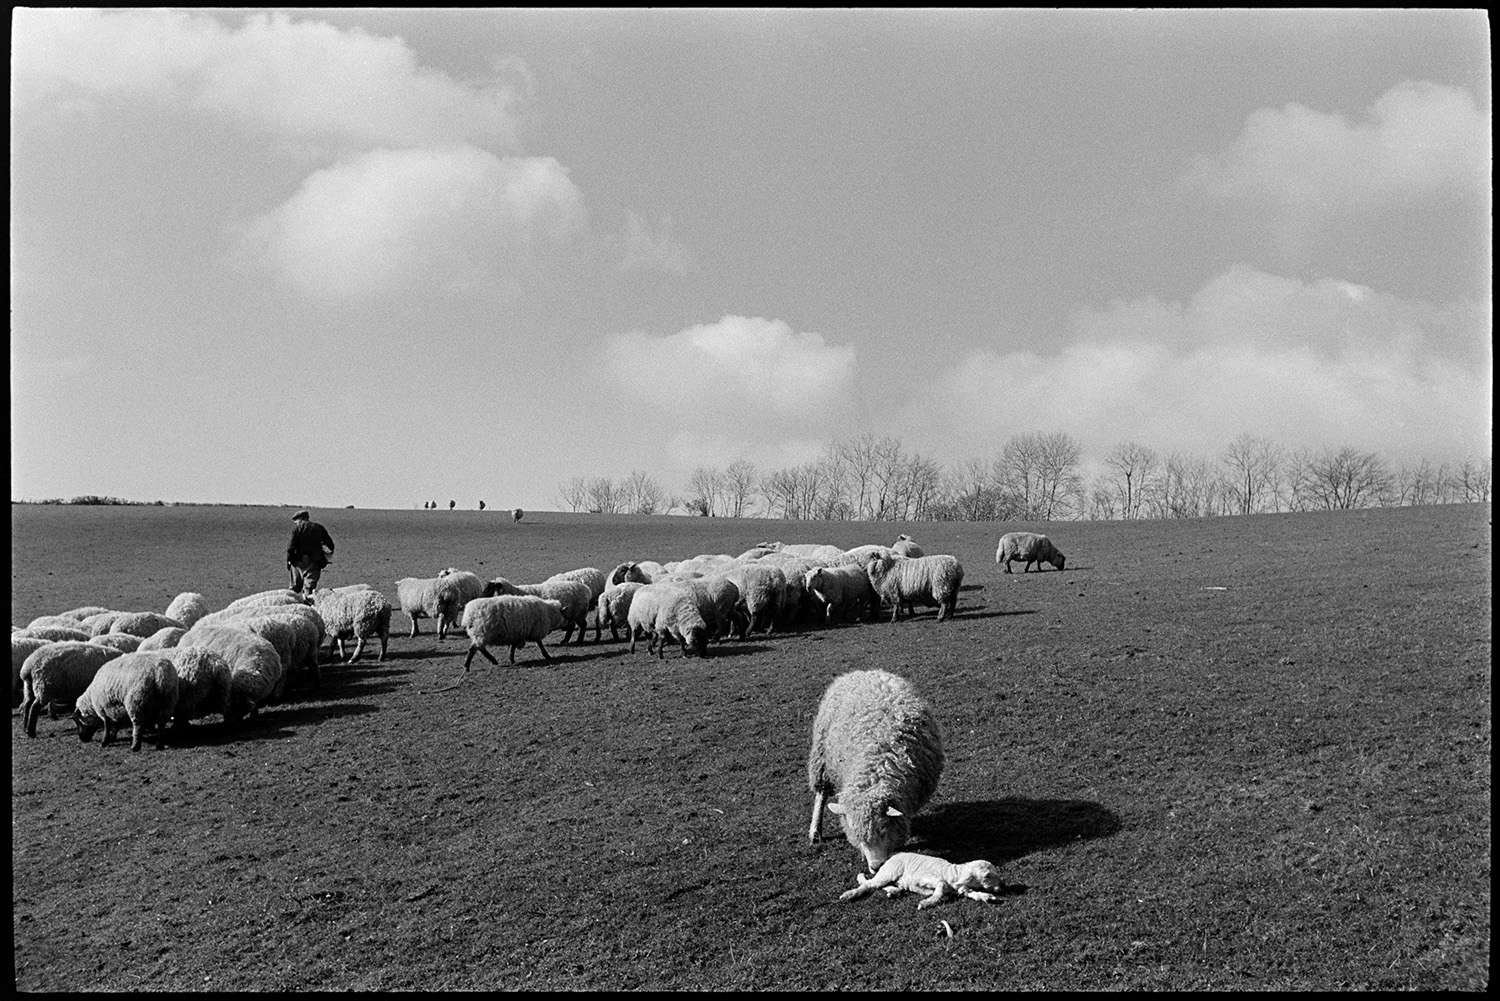 Shepherd feeding sheep, trying to make ewe take to new born lamb.
[George Ayre checking a flock of sheep in a field at Ashwell Farm, Dolton. A ewe and a new born lamb are in the foreground.]